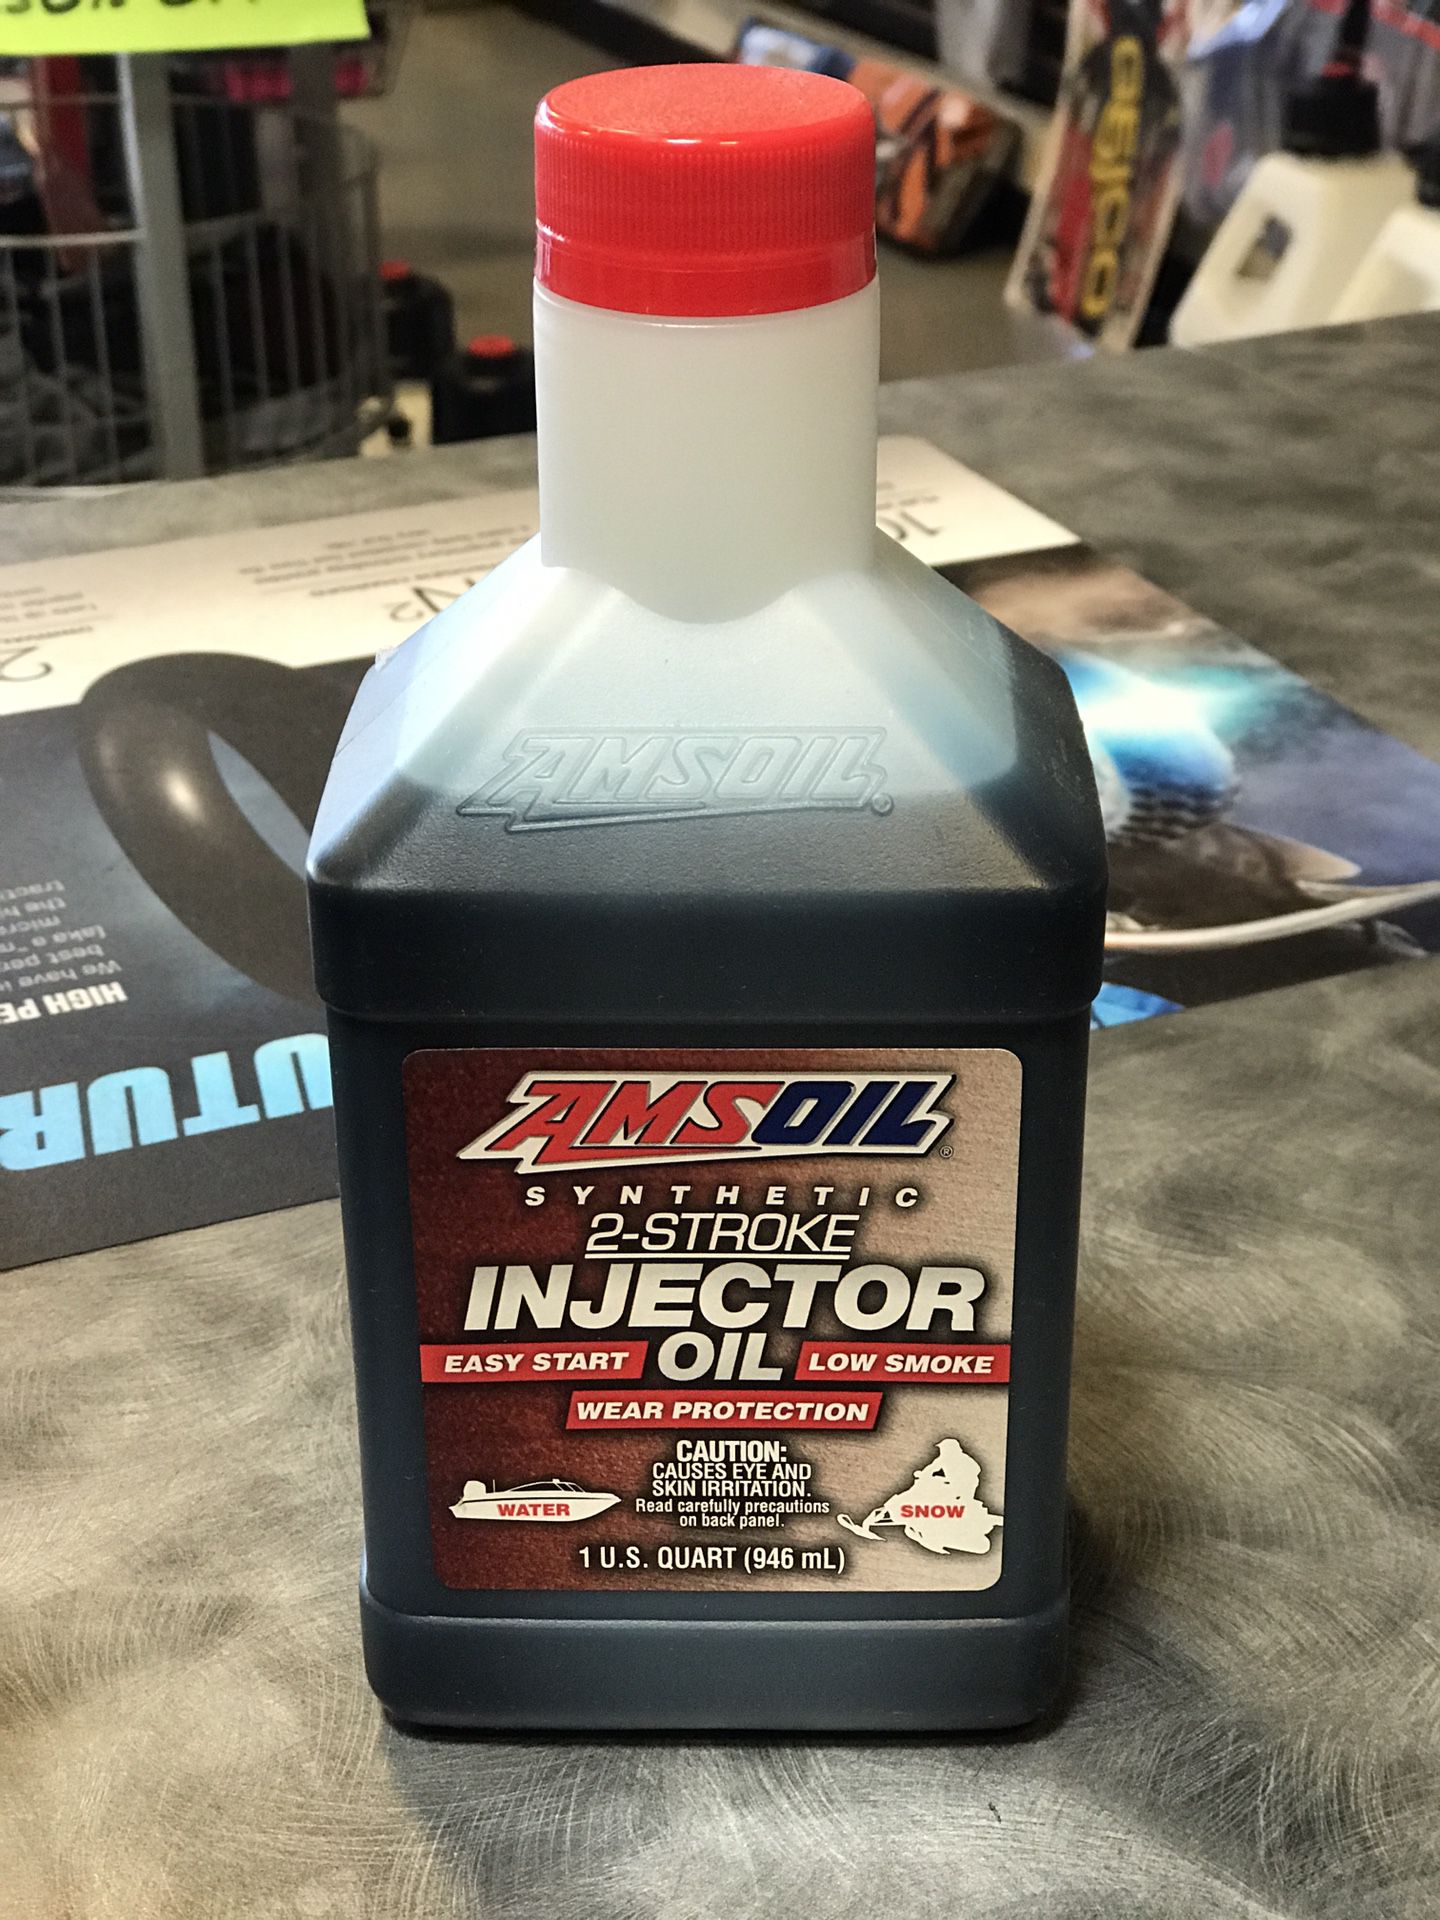 Injector oil for boats and water crafts jet ski wave runner stand up skis